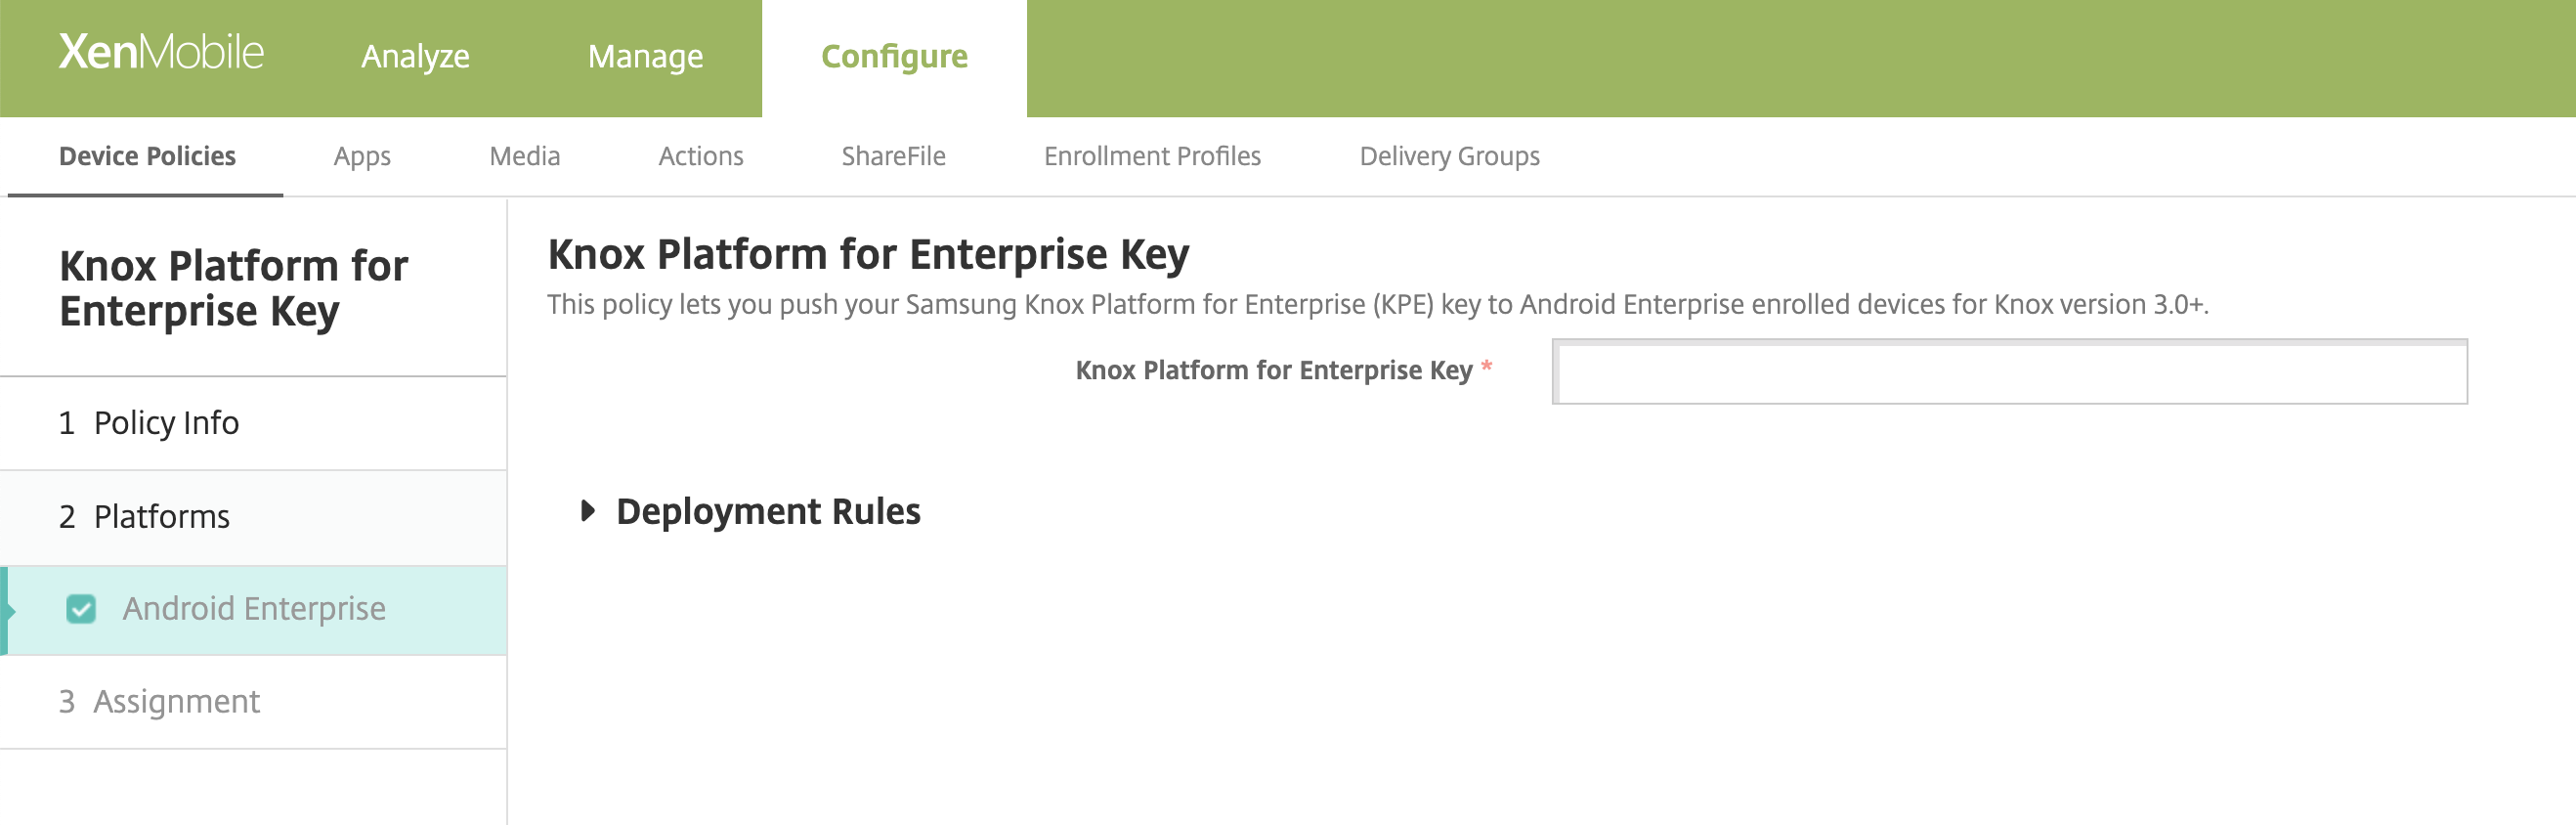 Image of Knox Platform for Enterprise device policy screen for Android Enterprise